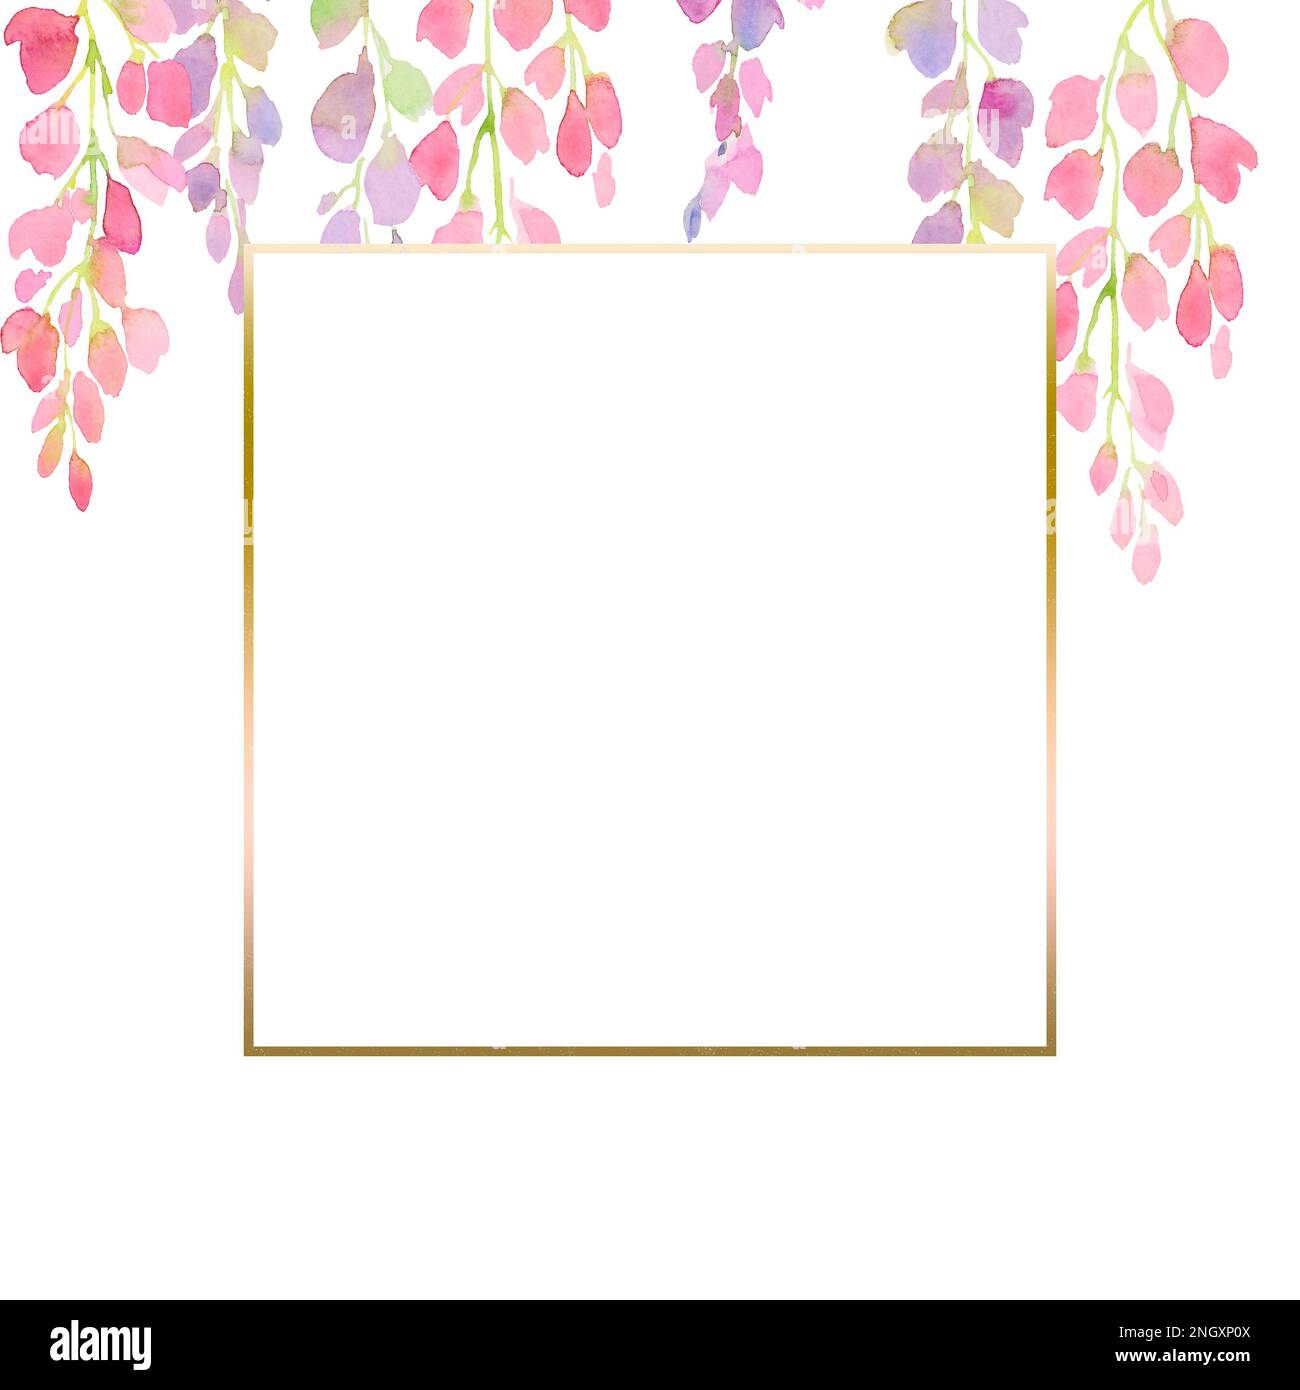 pink and purple wisteria frame,  branches and flowers, watercolor illustration.  design for print, greeting card, postcard, invitation, fashion fabric Stock Photo